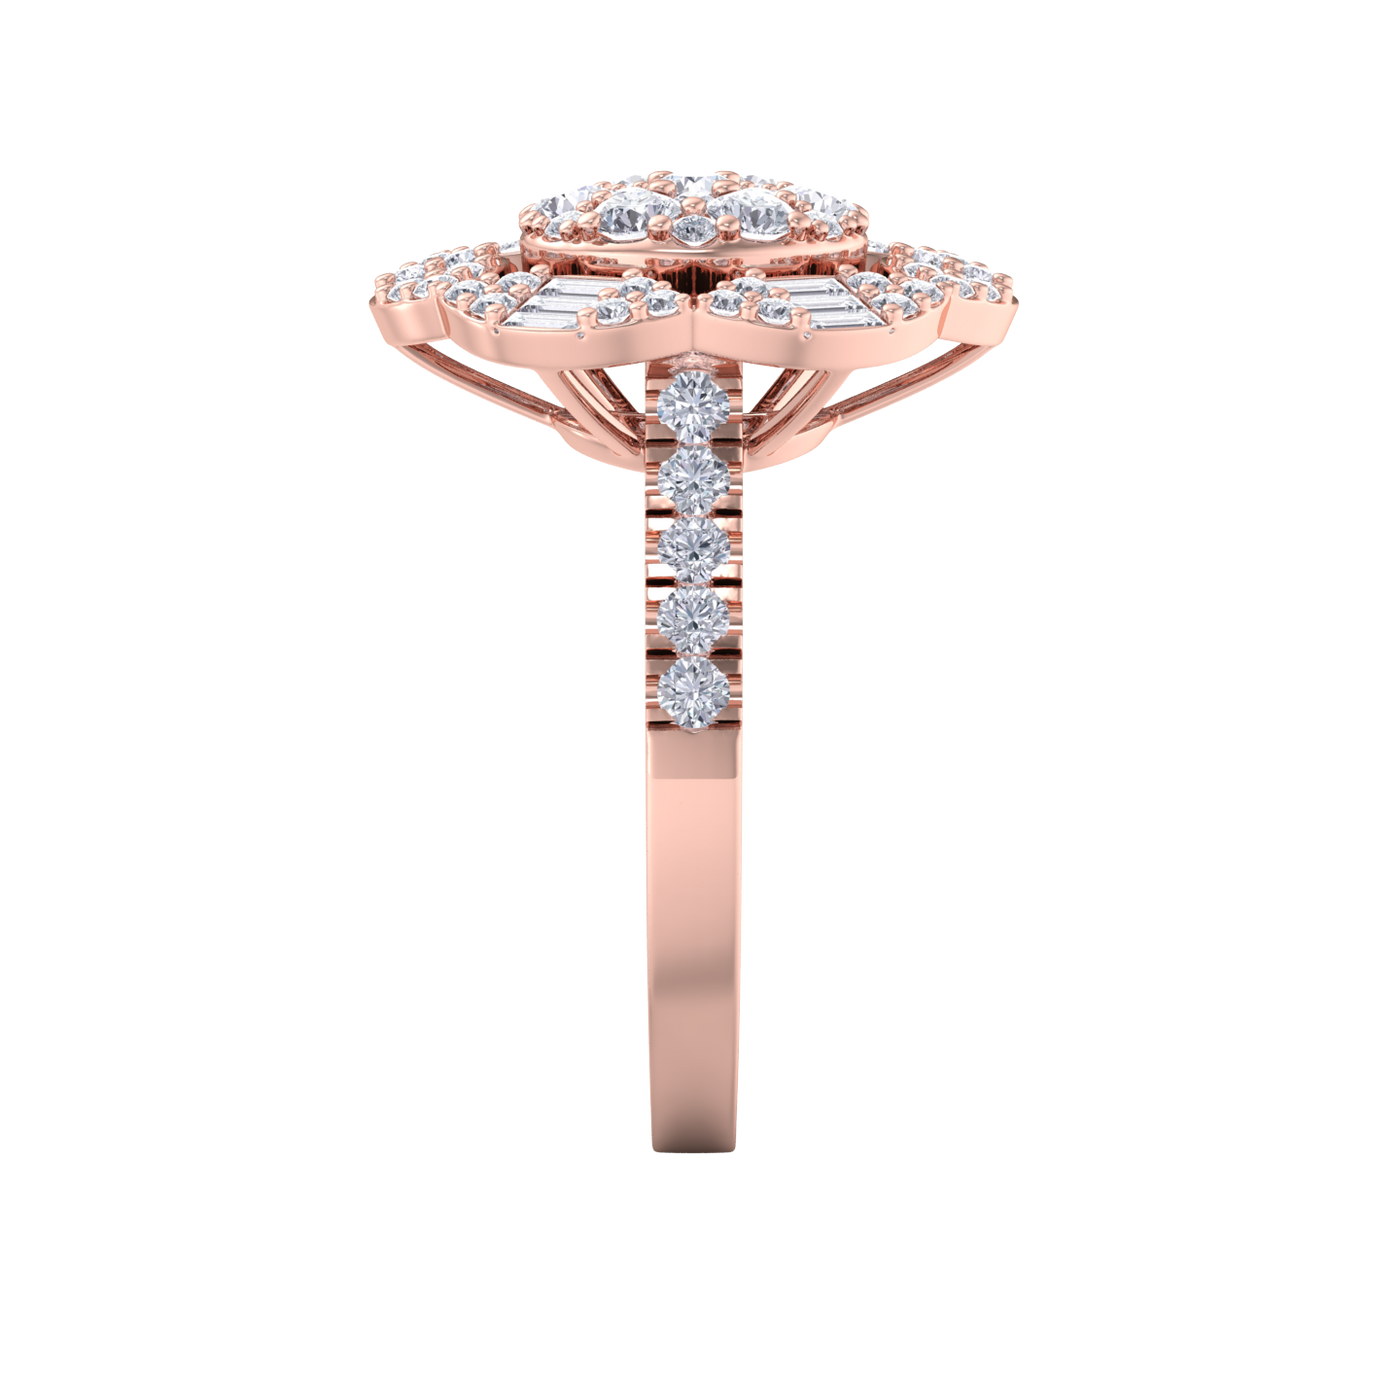 Diamond flower ring in rose gold with white diamonds of 1.52 ct in weight